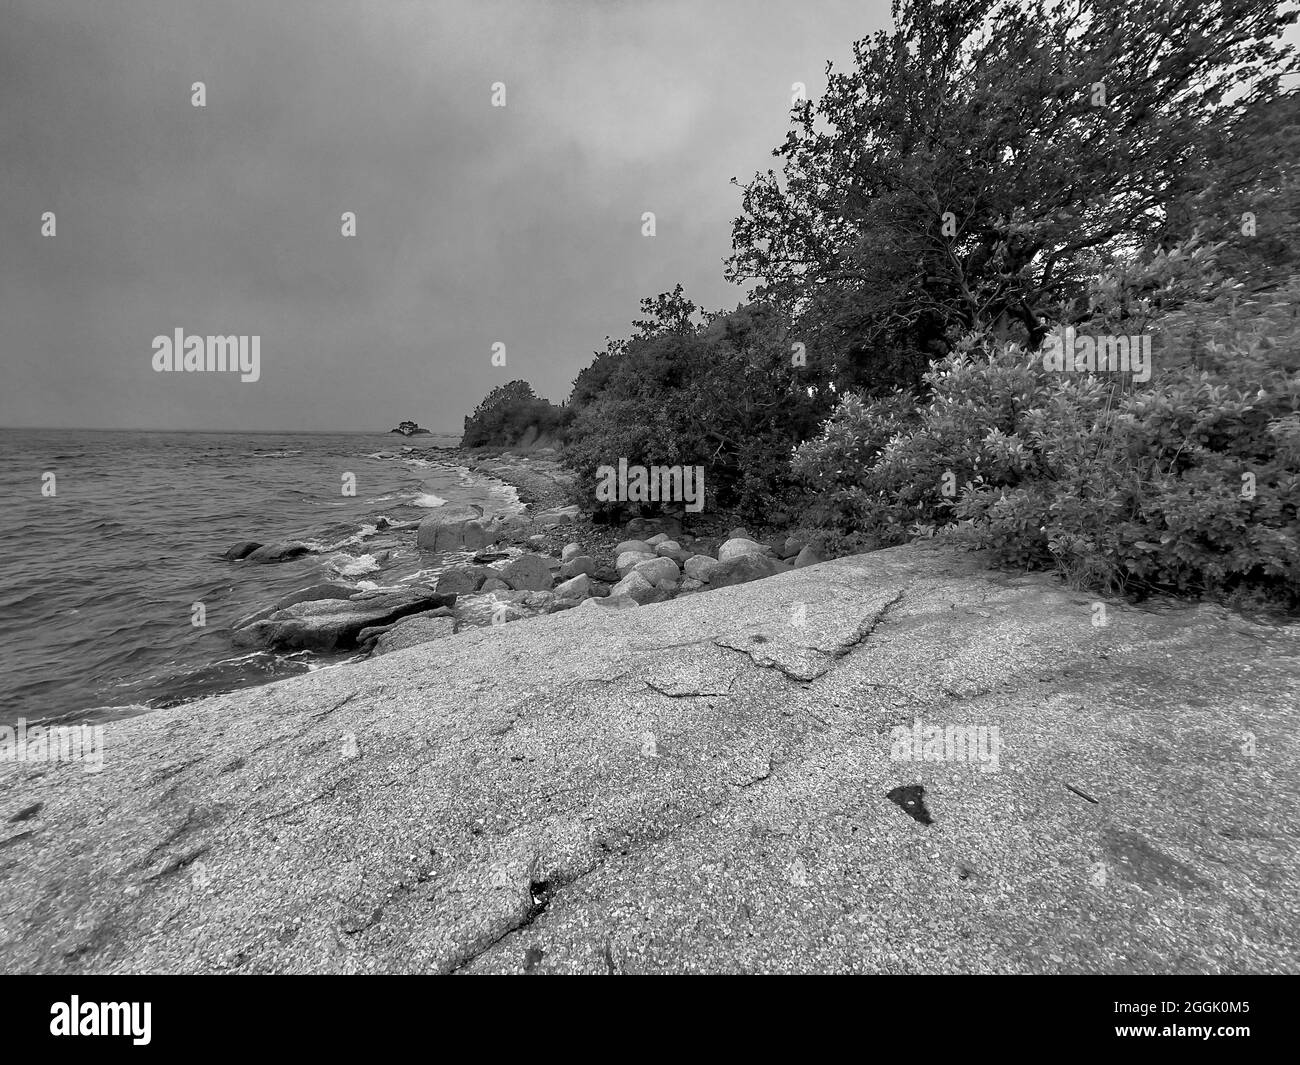 Rough, rocky Maine coastline on an overcast day on Flye Point, Brooklin Maine and near “The Lookout Lodge” Stock Photo